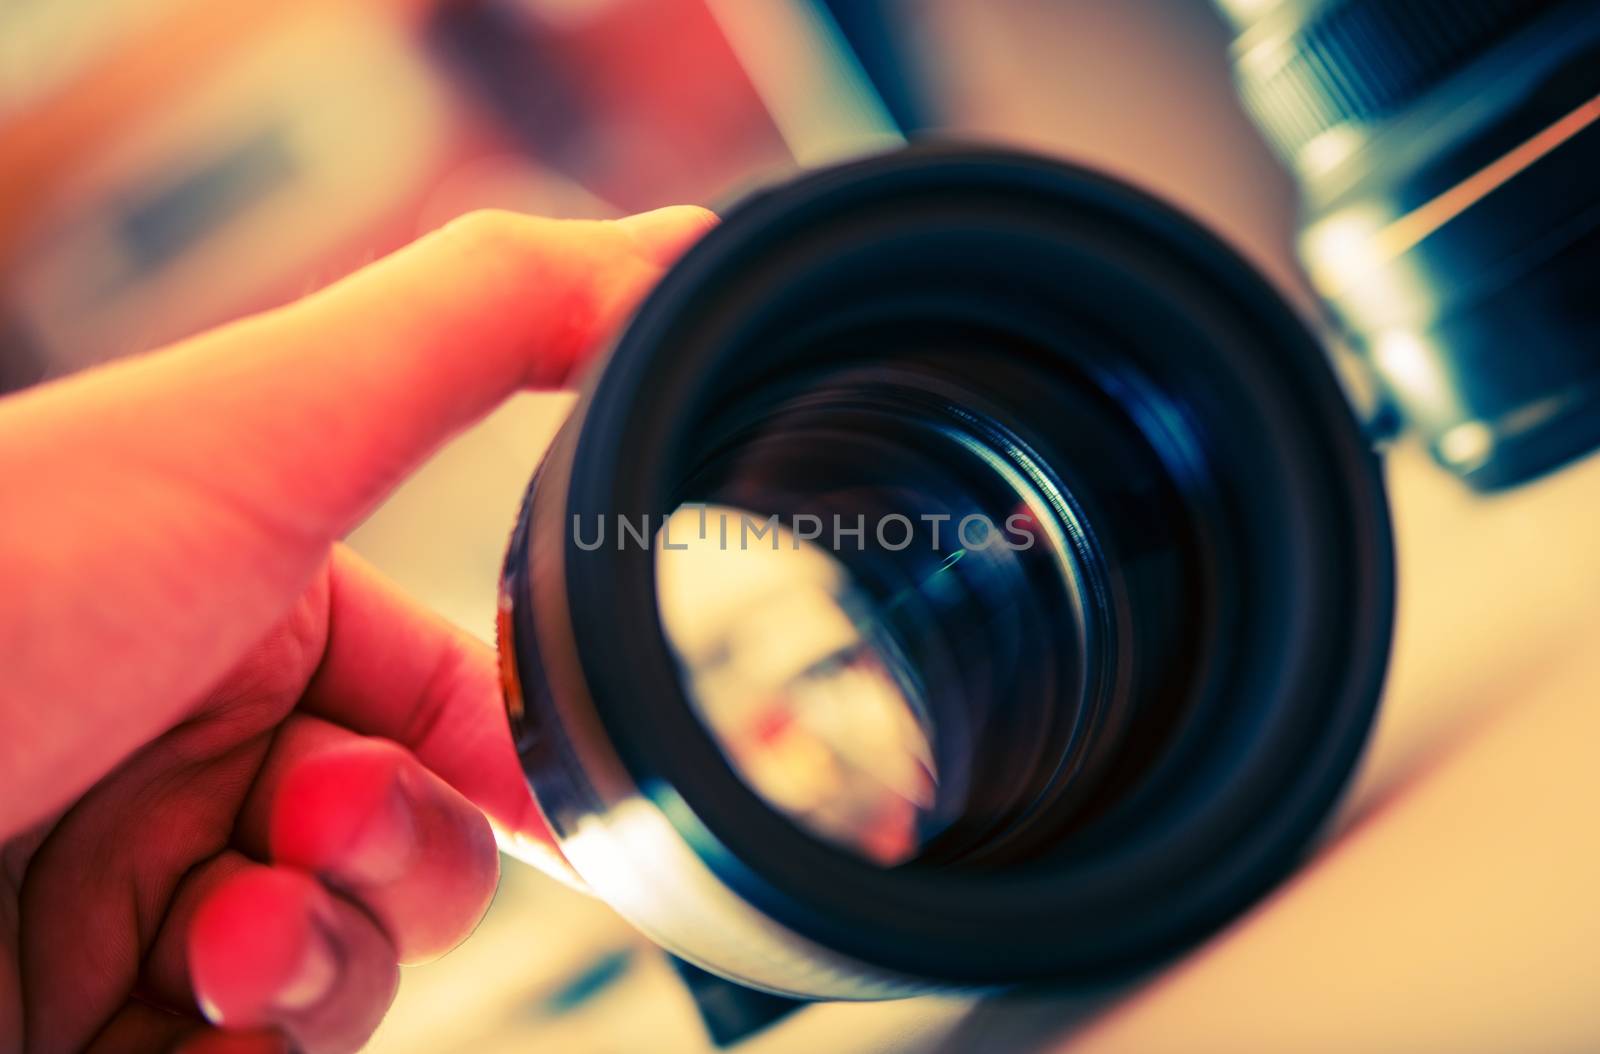 Servicing Photography Lens by welcomia